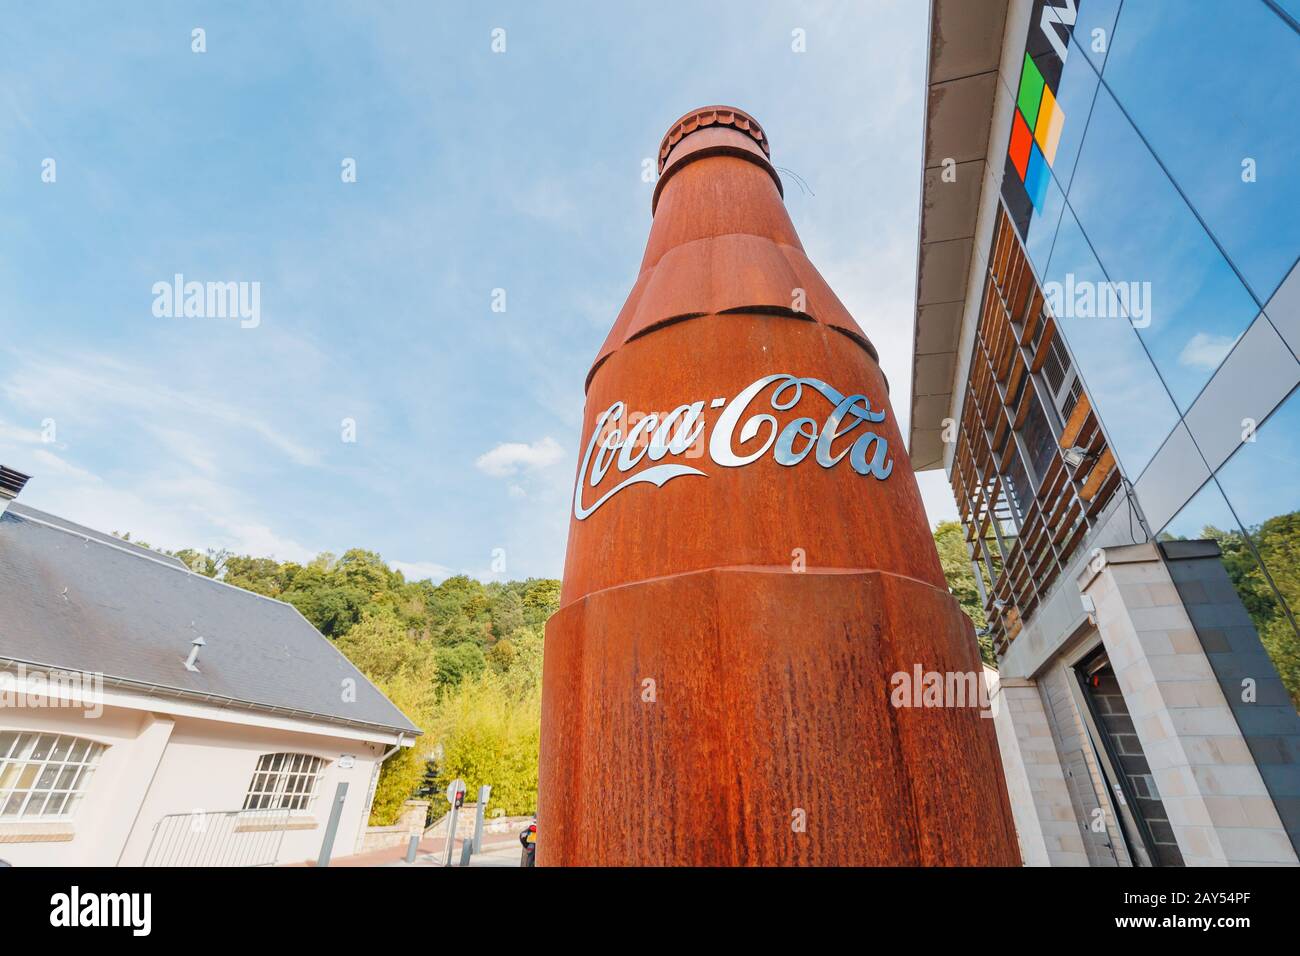 1 August 2019, Luxembourg: Coca-cola rusty sculpture at ctiy street Stock  Photo - Alamy